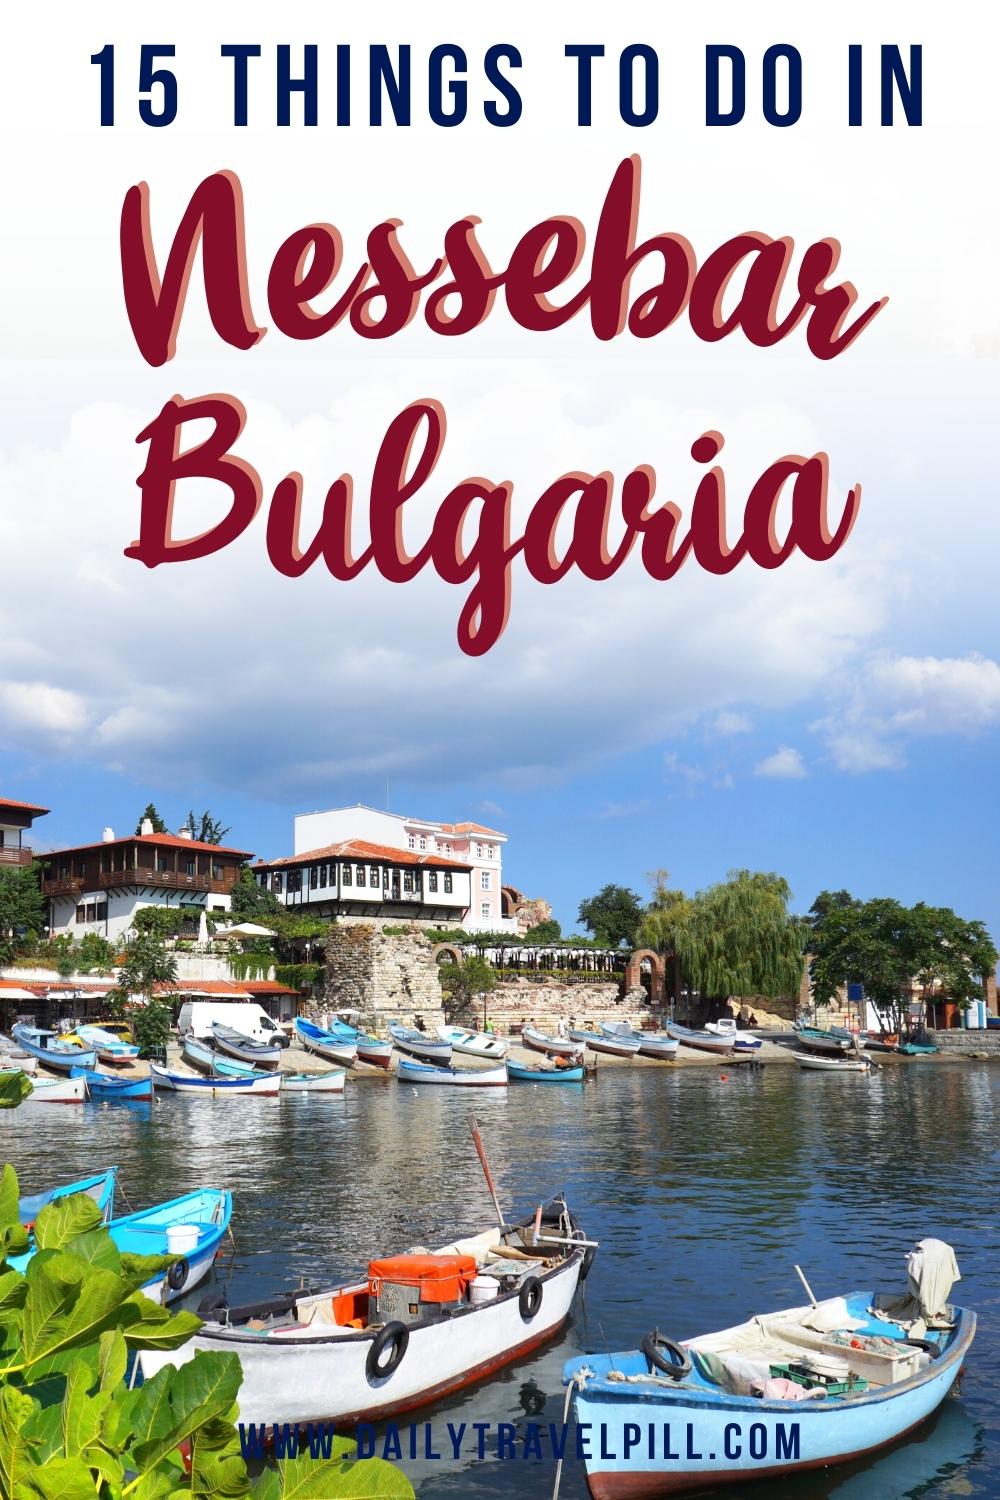 things to do in nessebar, nessebar tourist attractions, places to visit in nessebar, places to see in nessebar, nessebar sightseeing